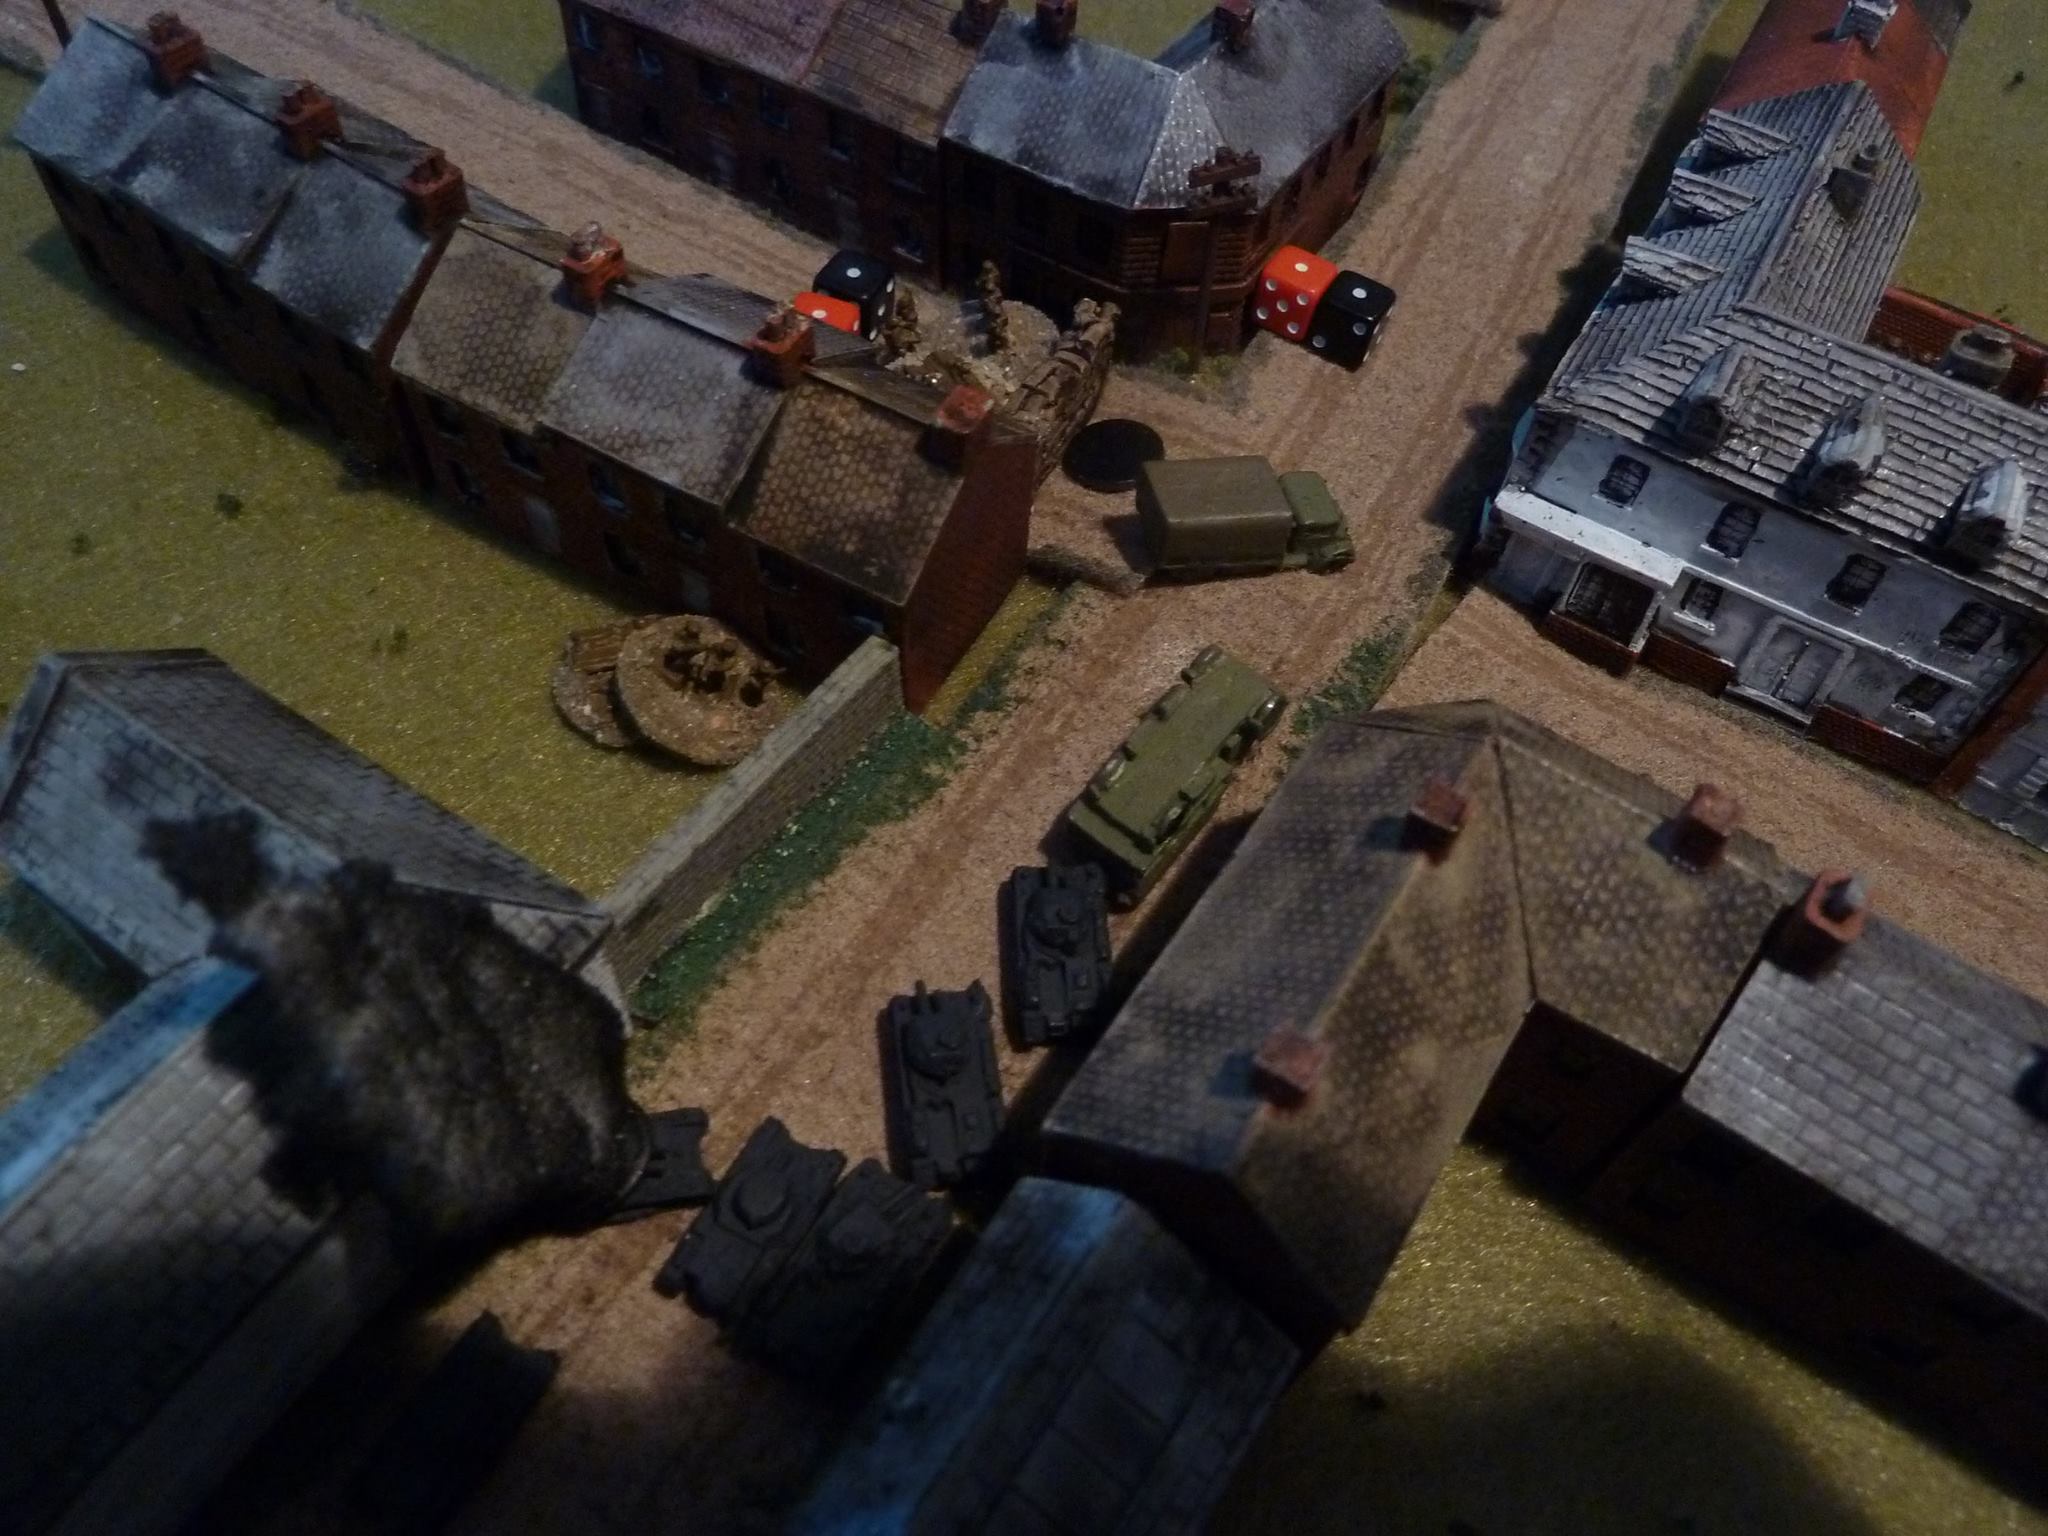  A little later: &nbsp;the lead Pz II starts ripping up the barricade, the ATR man dies and things look desperate for the Brits! 